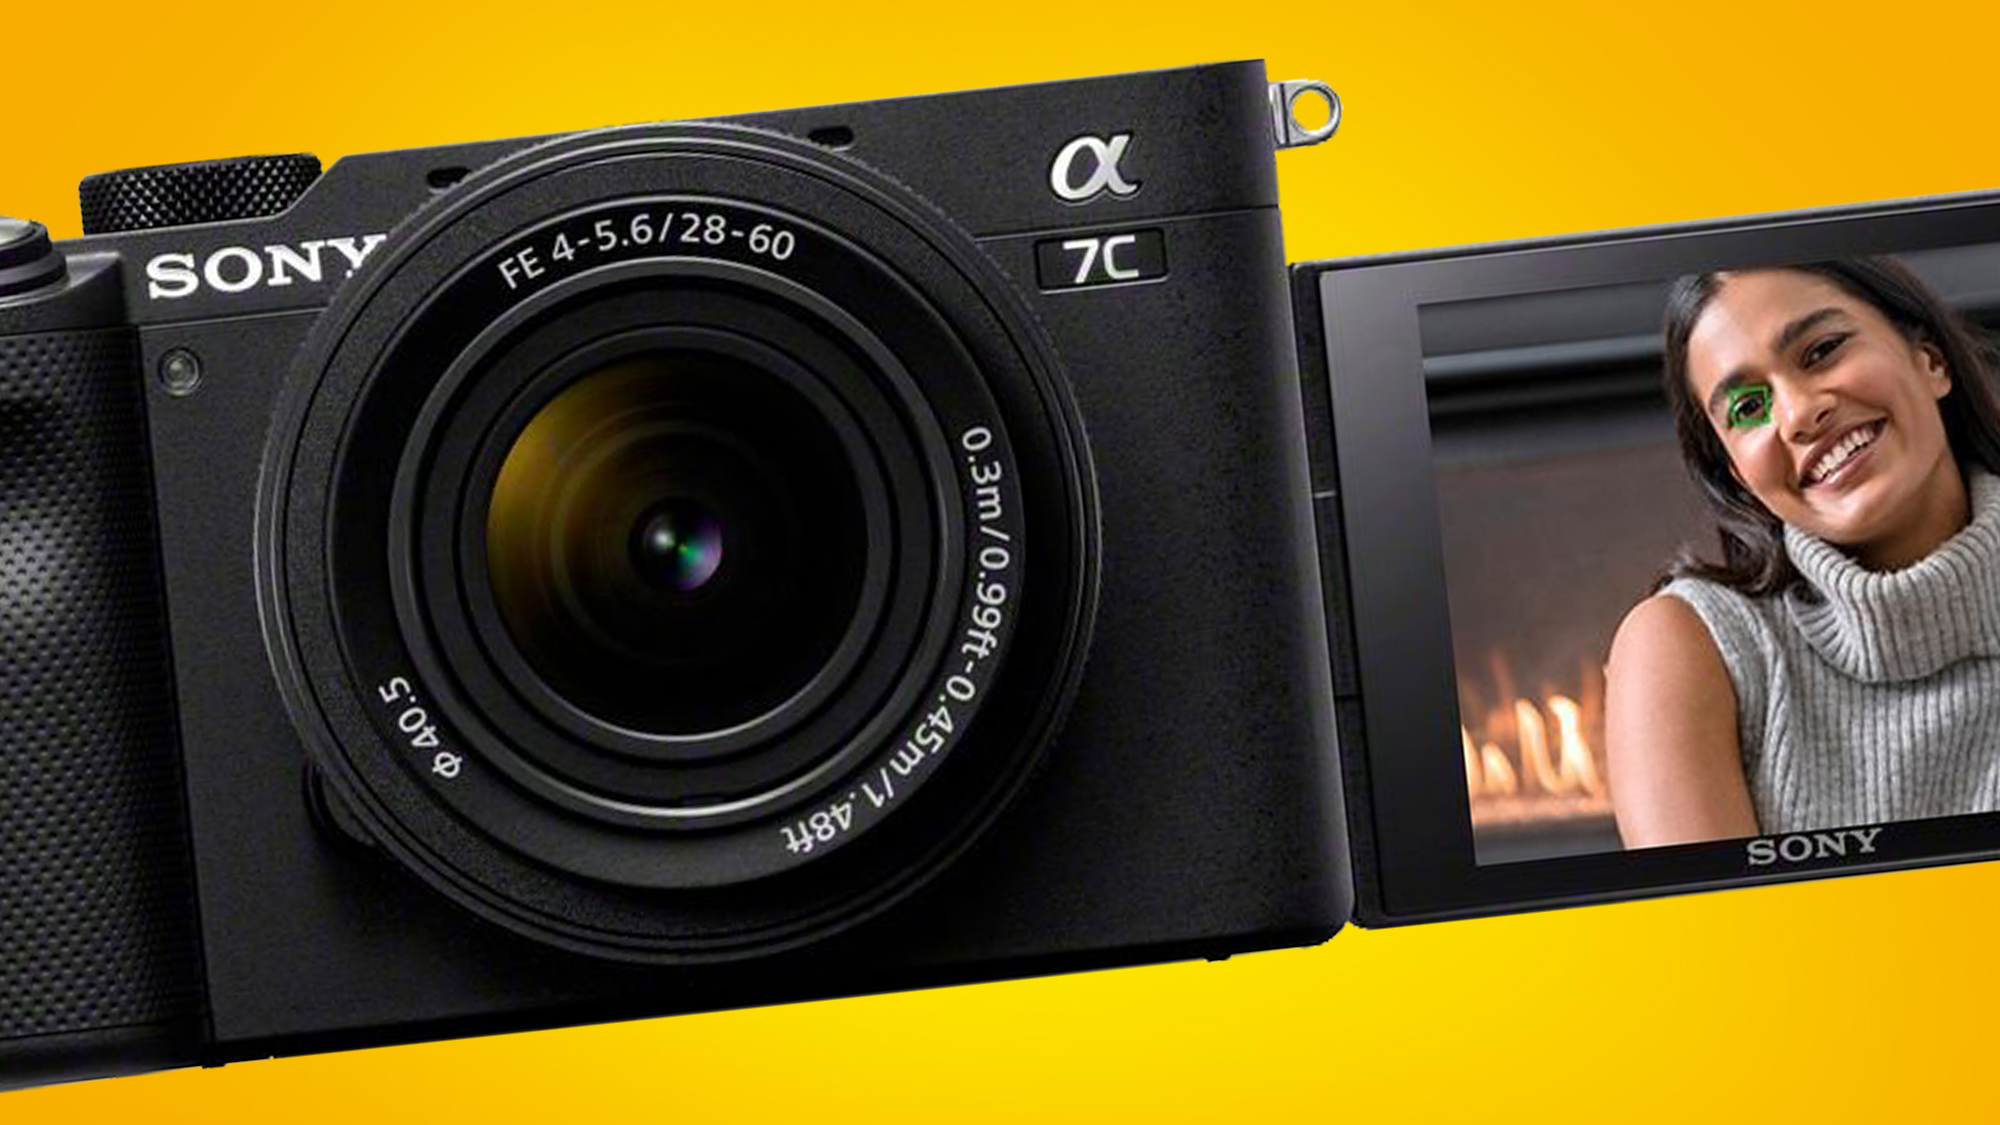 The Sony A7C camera on a yellow background